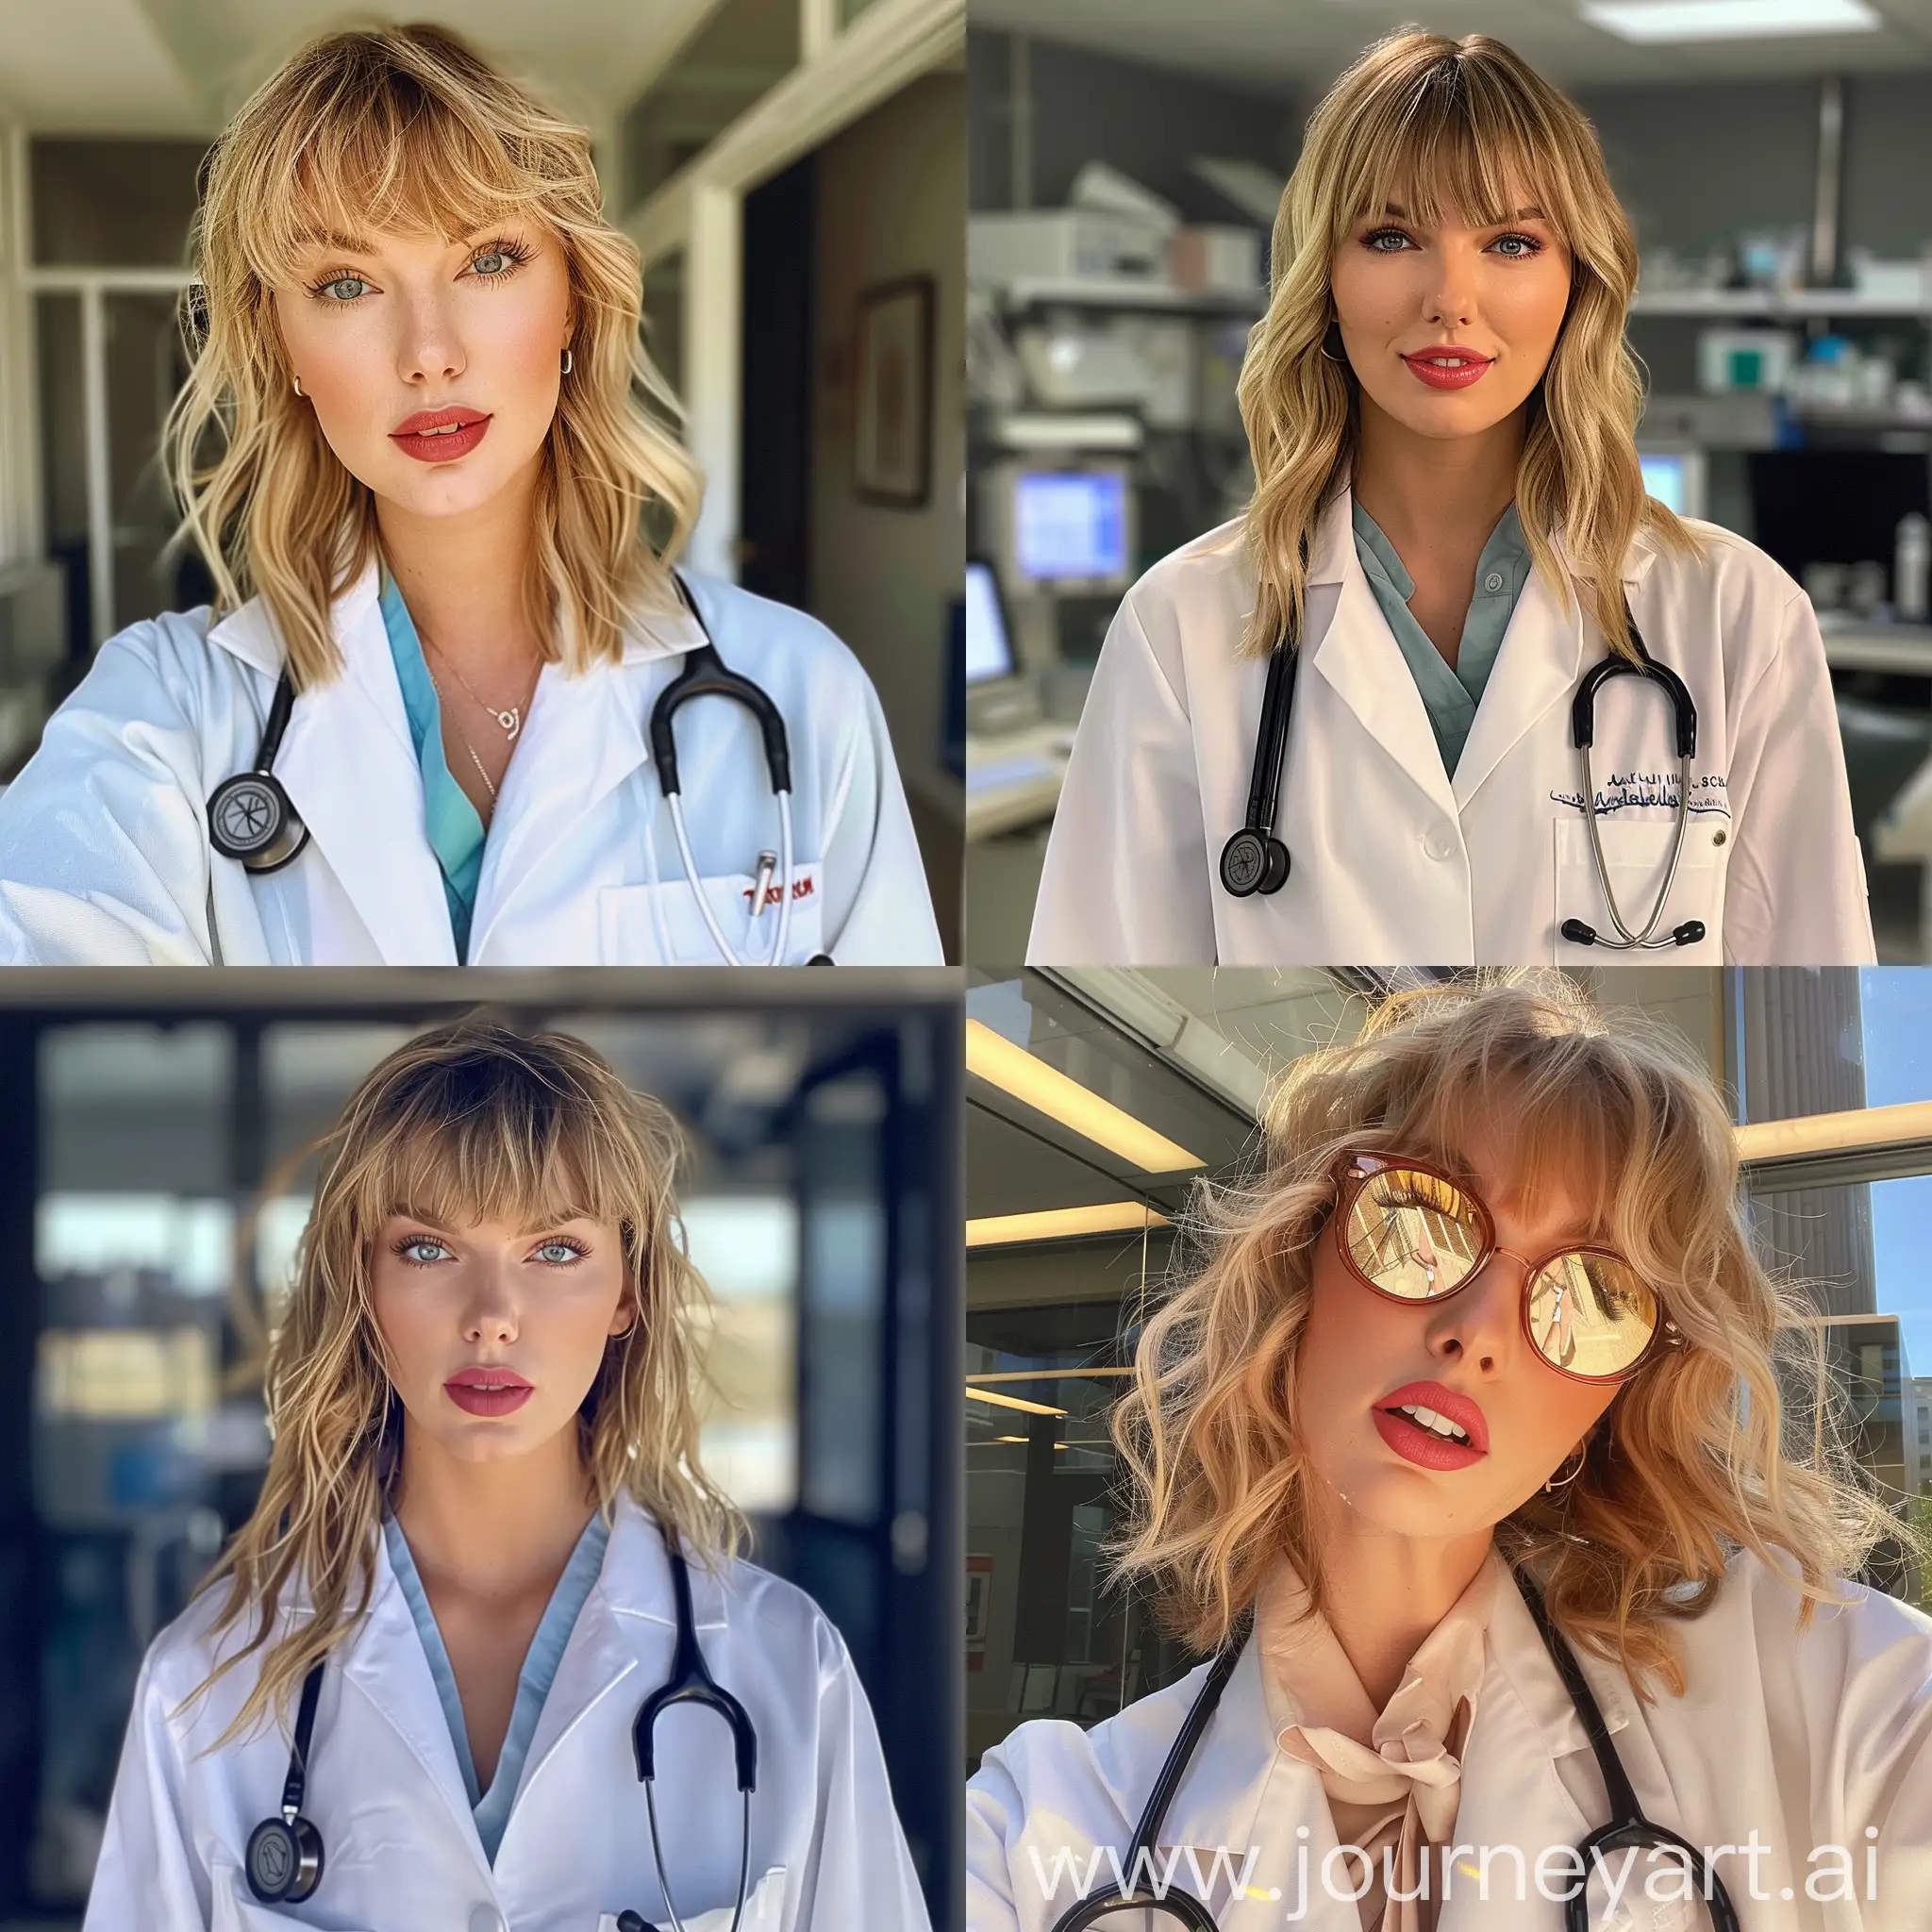 Taylor swift, wearing a medical apparel 